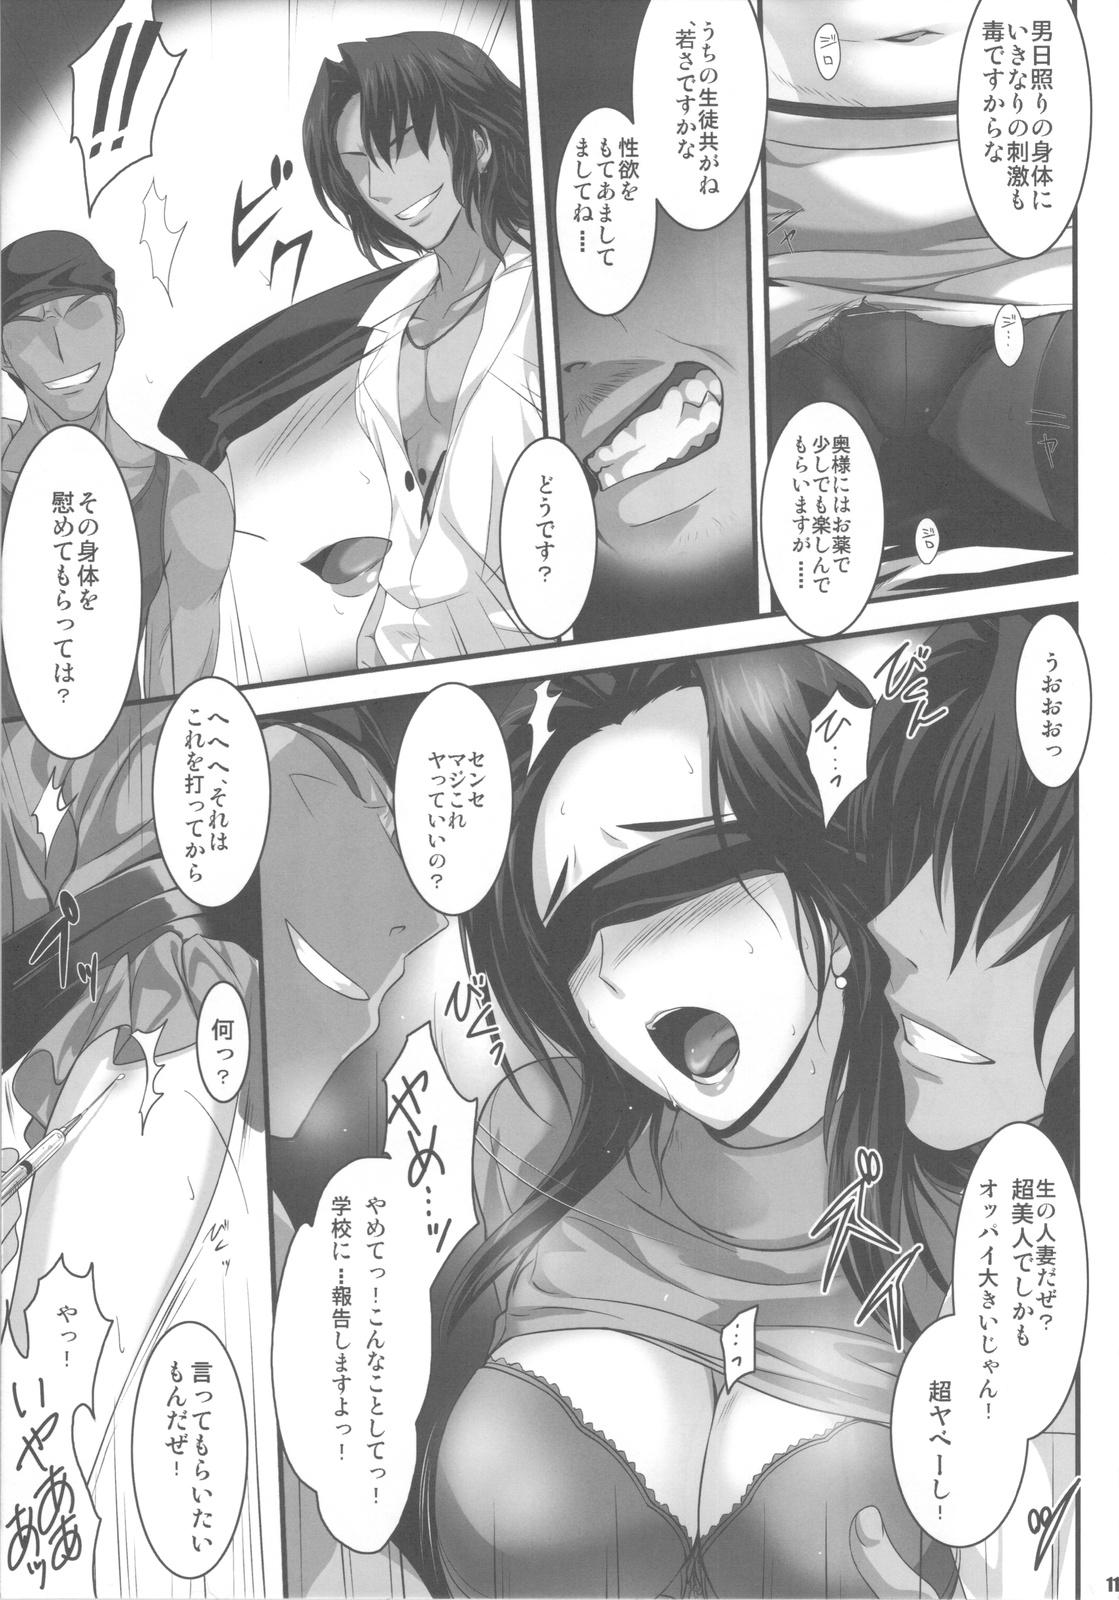 Fake PILE EDGE LOVE INJECTION - Love plus Cunnilingus - Page 10